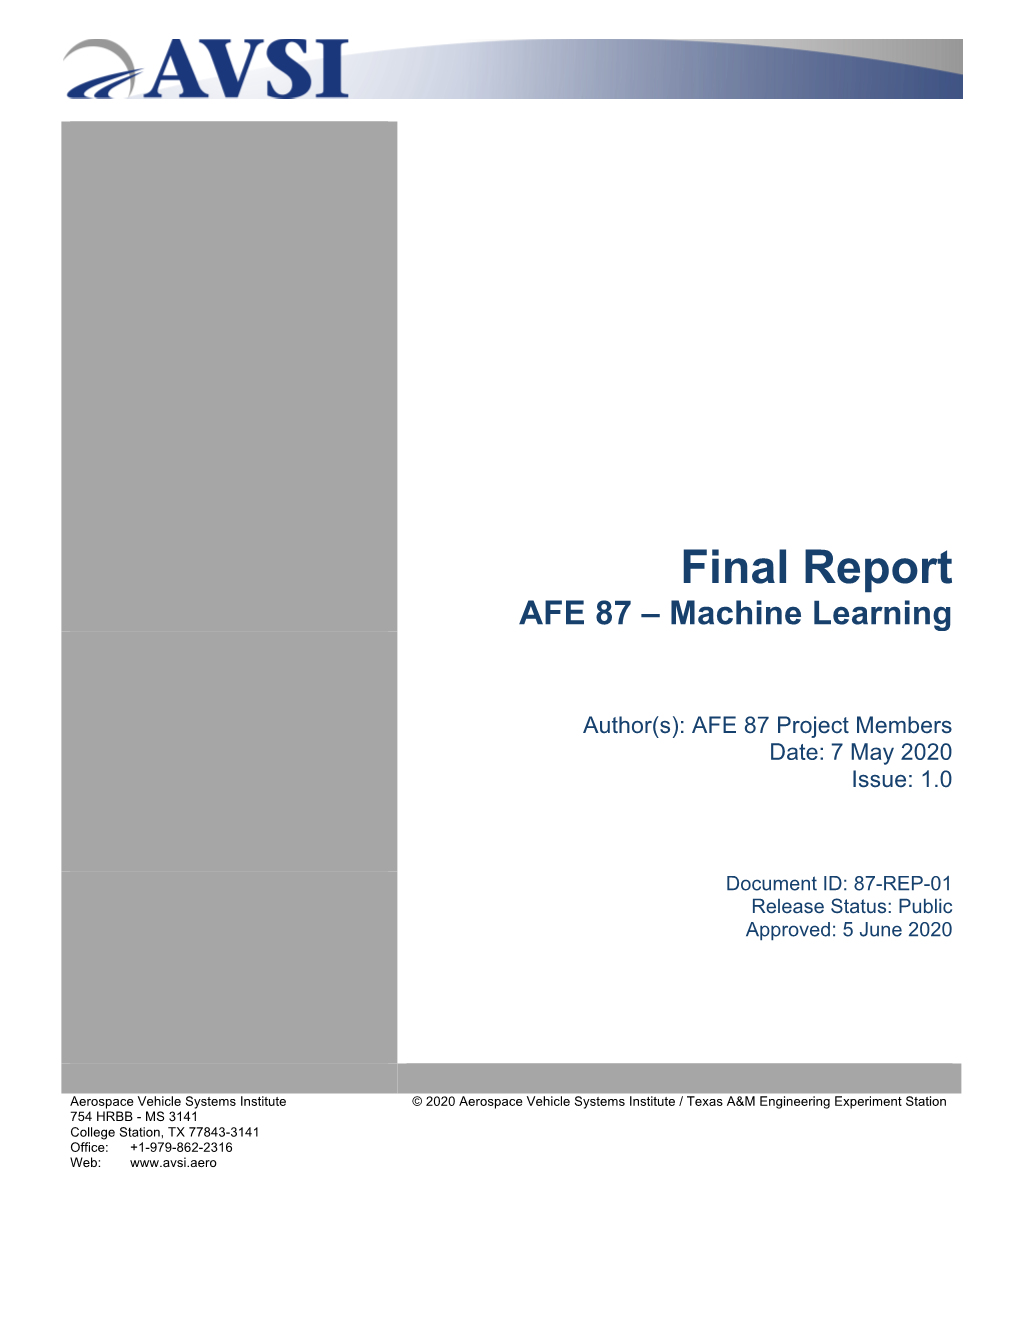 Final Report AFE 87 – Machine Learning